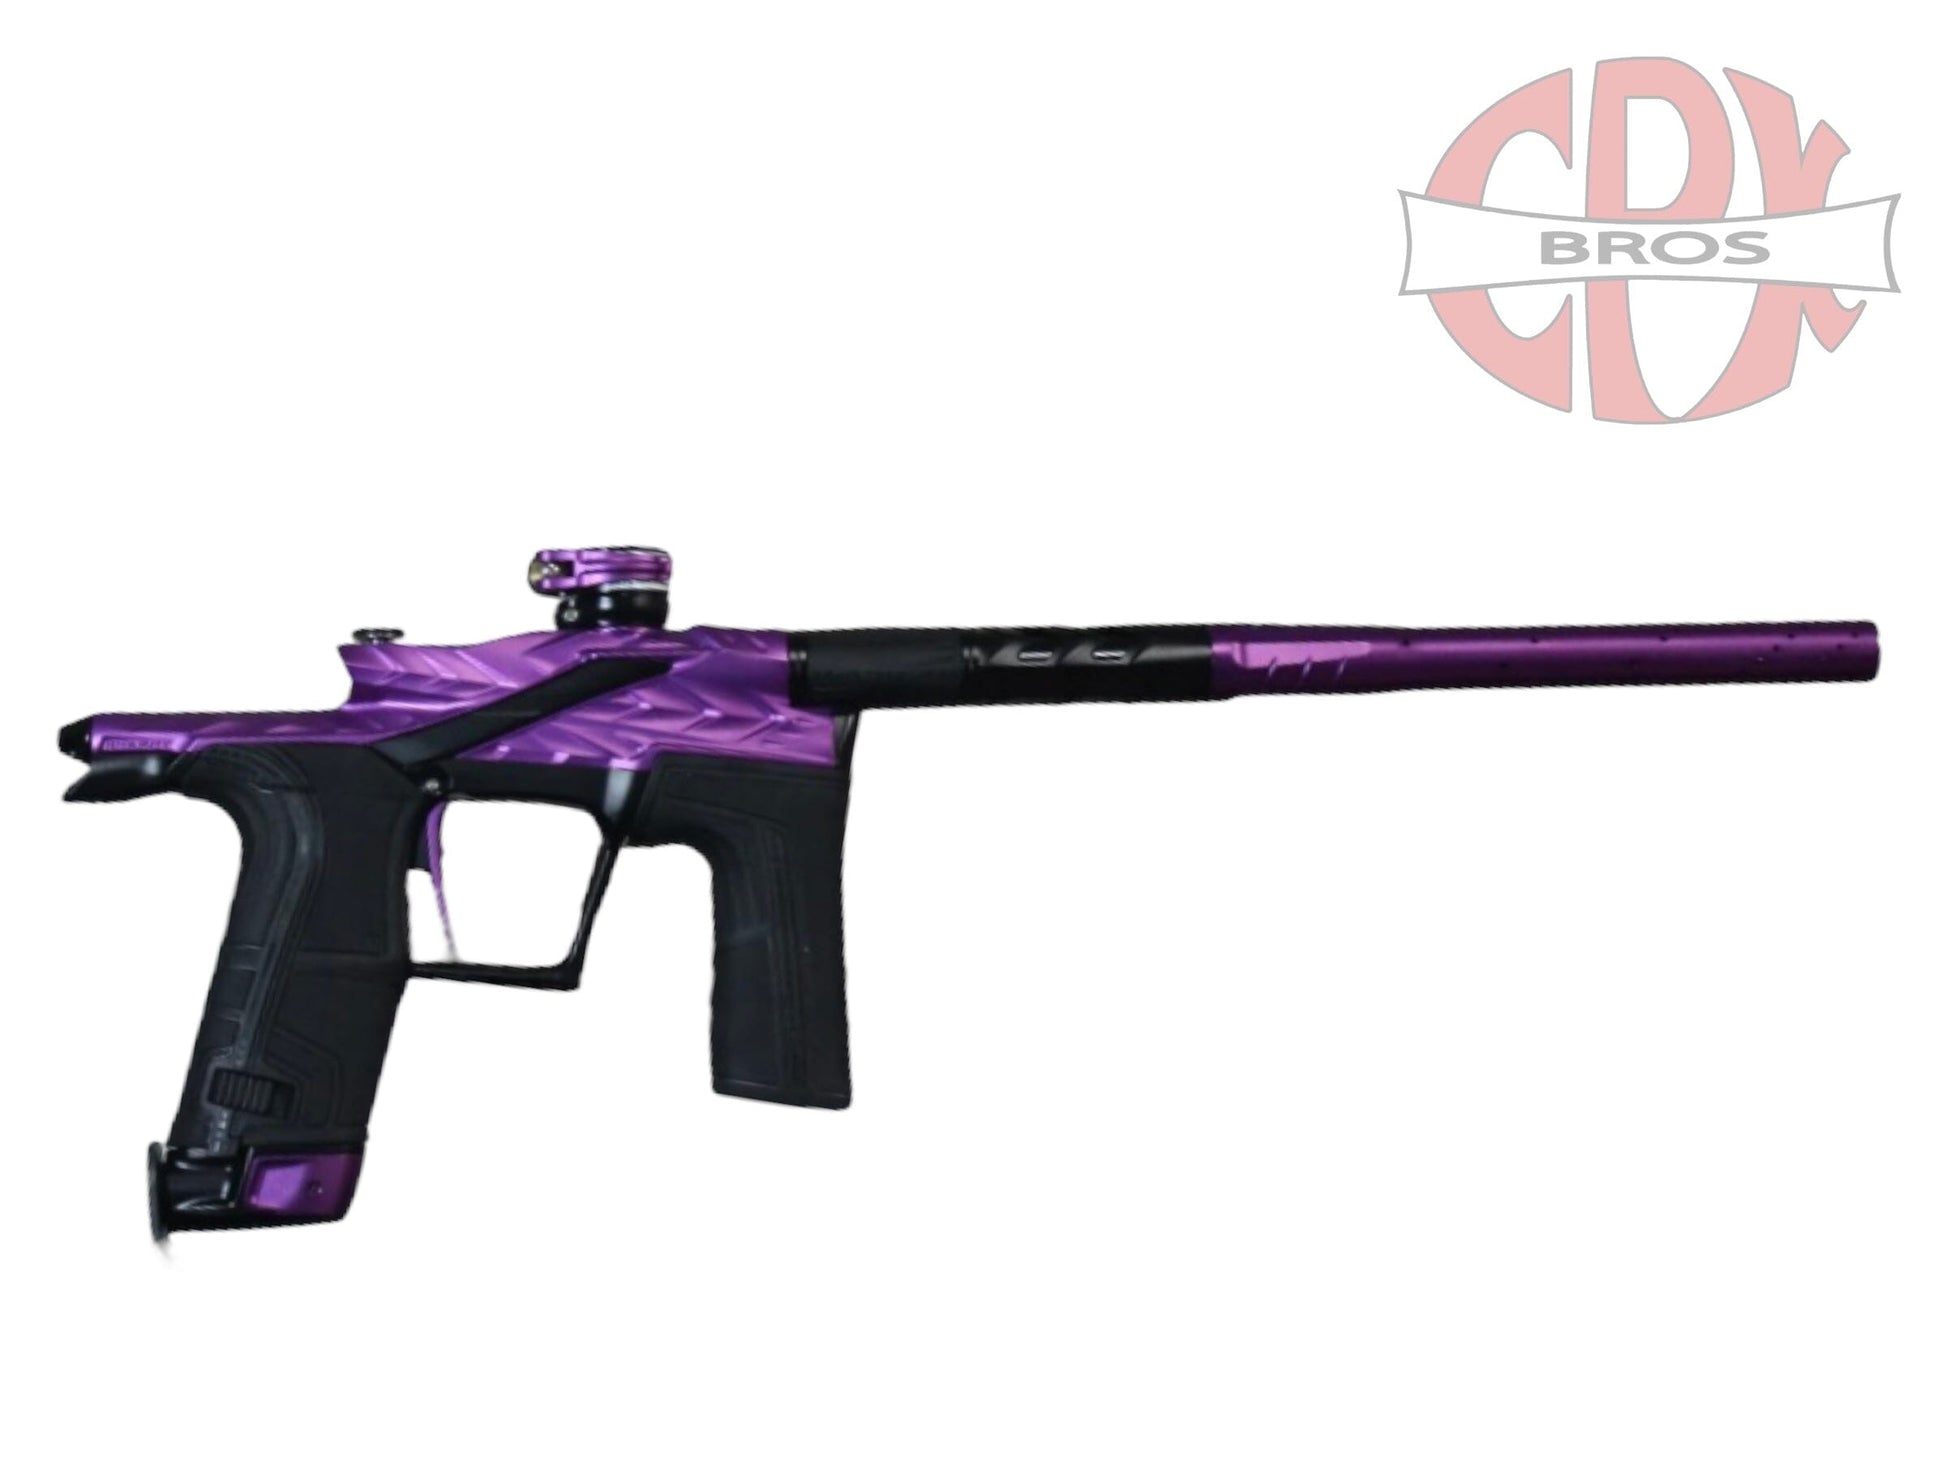 Used NEW HK FOSSIL- ECLIPSE LV2 - Purple/Black Paintball Gun from CPXBrosPaintball Buy/Sell/Trade Paintball Markers, Paintball Hoppers, Paintball Masks, and Hormesis Headbands